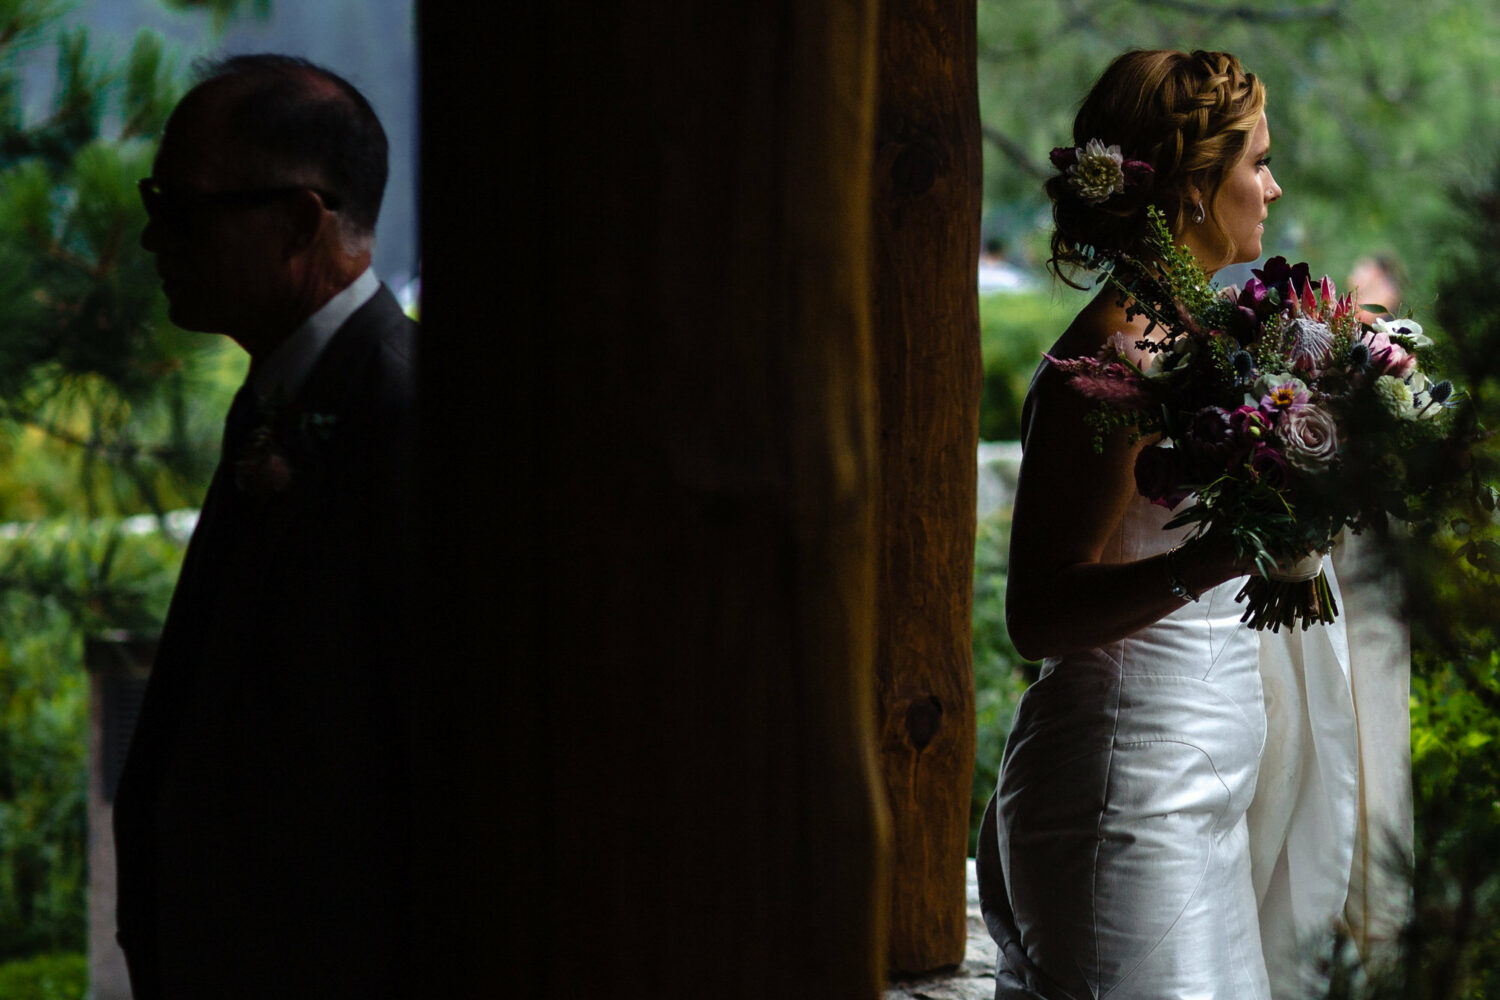 A bride holds her floral bouquet as she waits for the wedding to start.